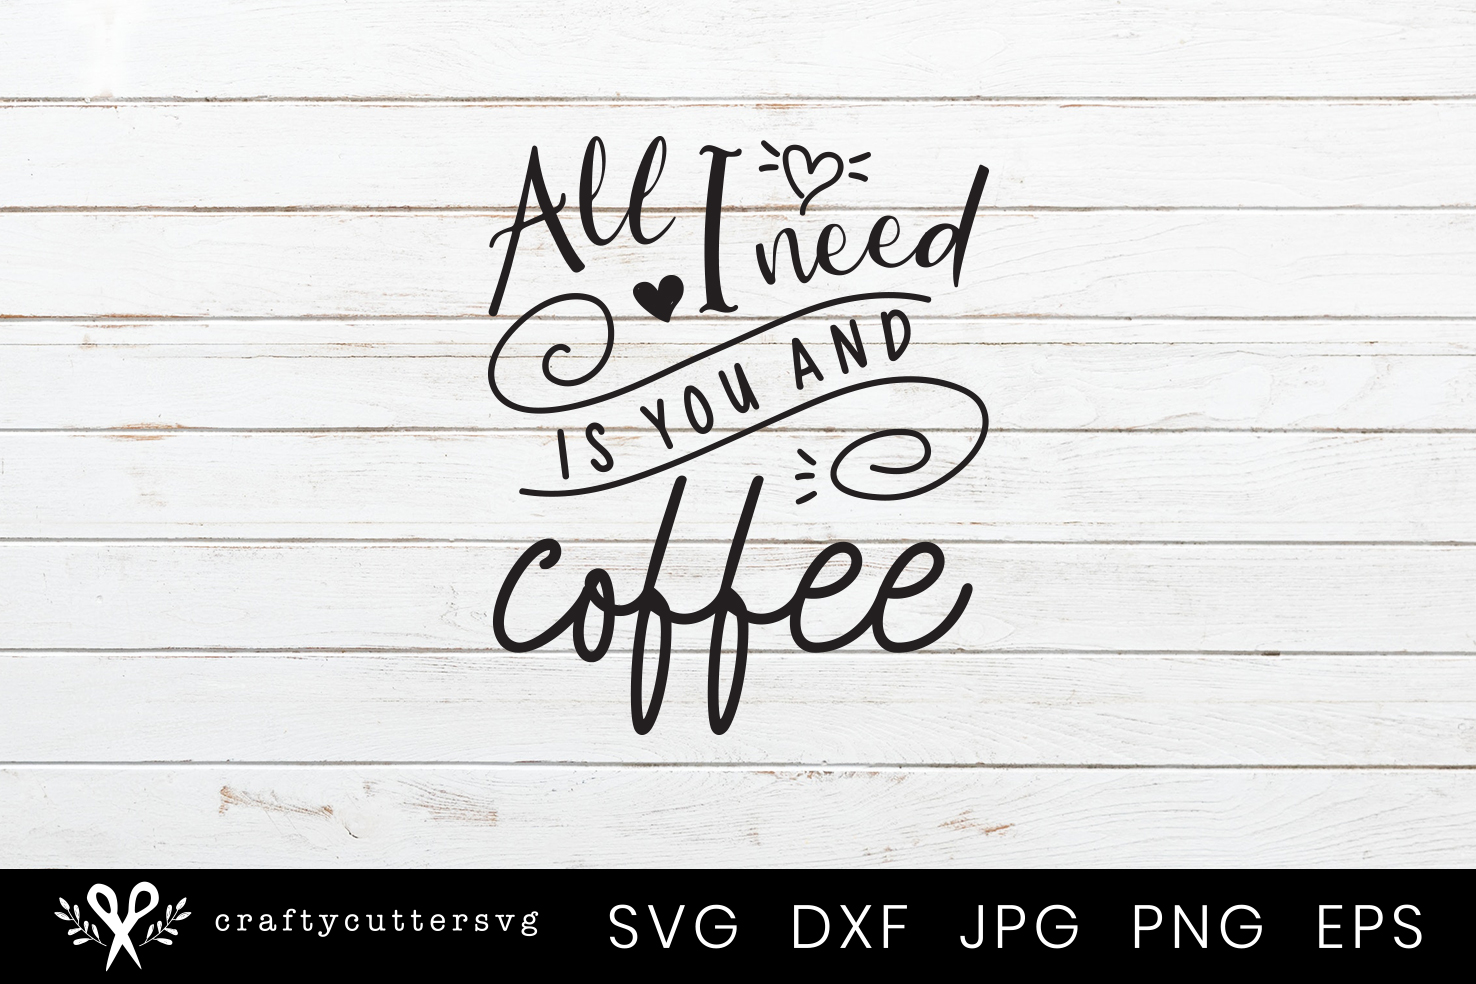 Download All I need is you and Coffee Svg Quote Coffee Mug Design